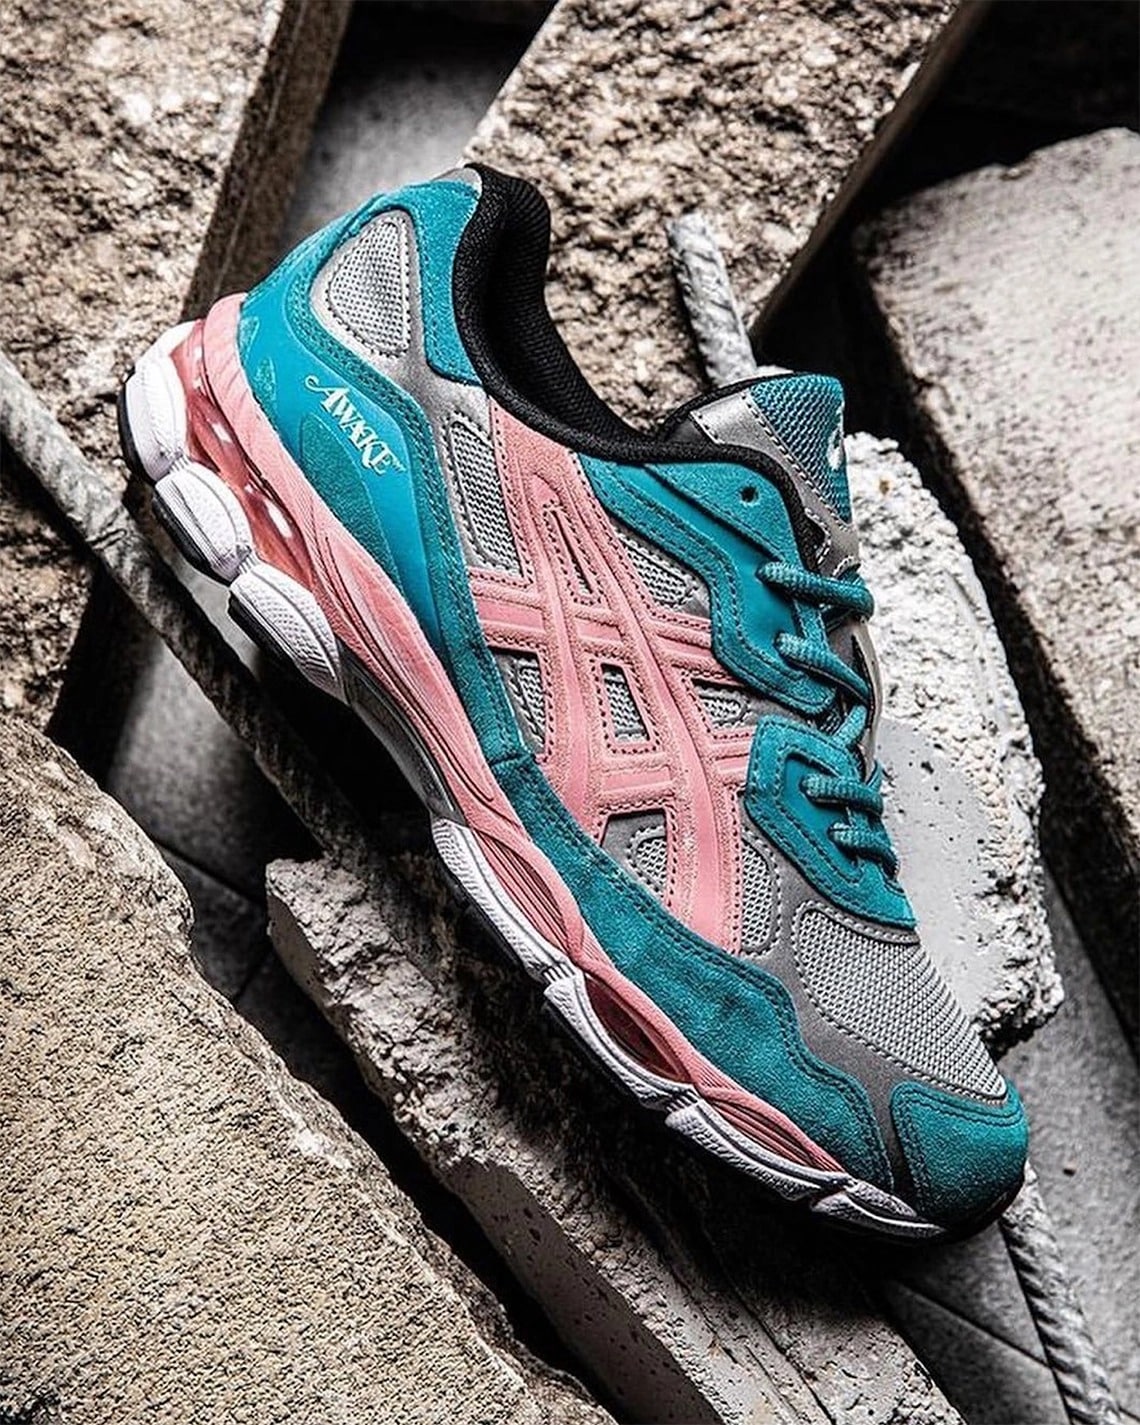 Angelo Baque and ASICS Celebrate Their Collaboration with New GEL-NYC